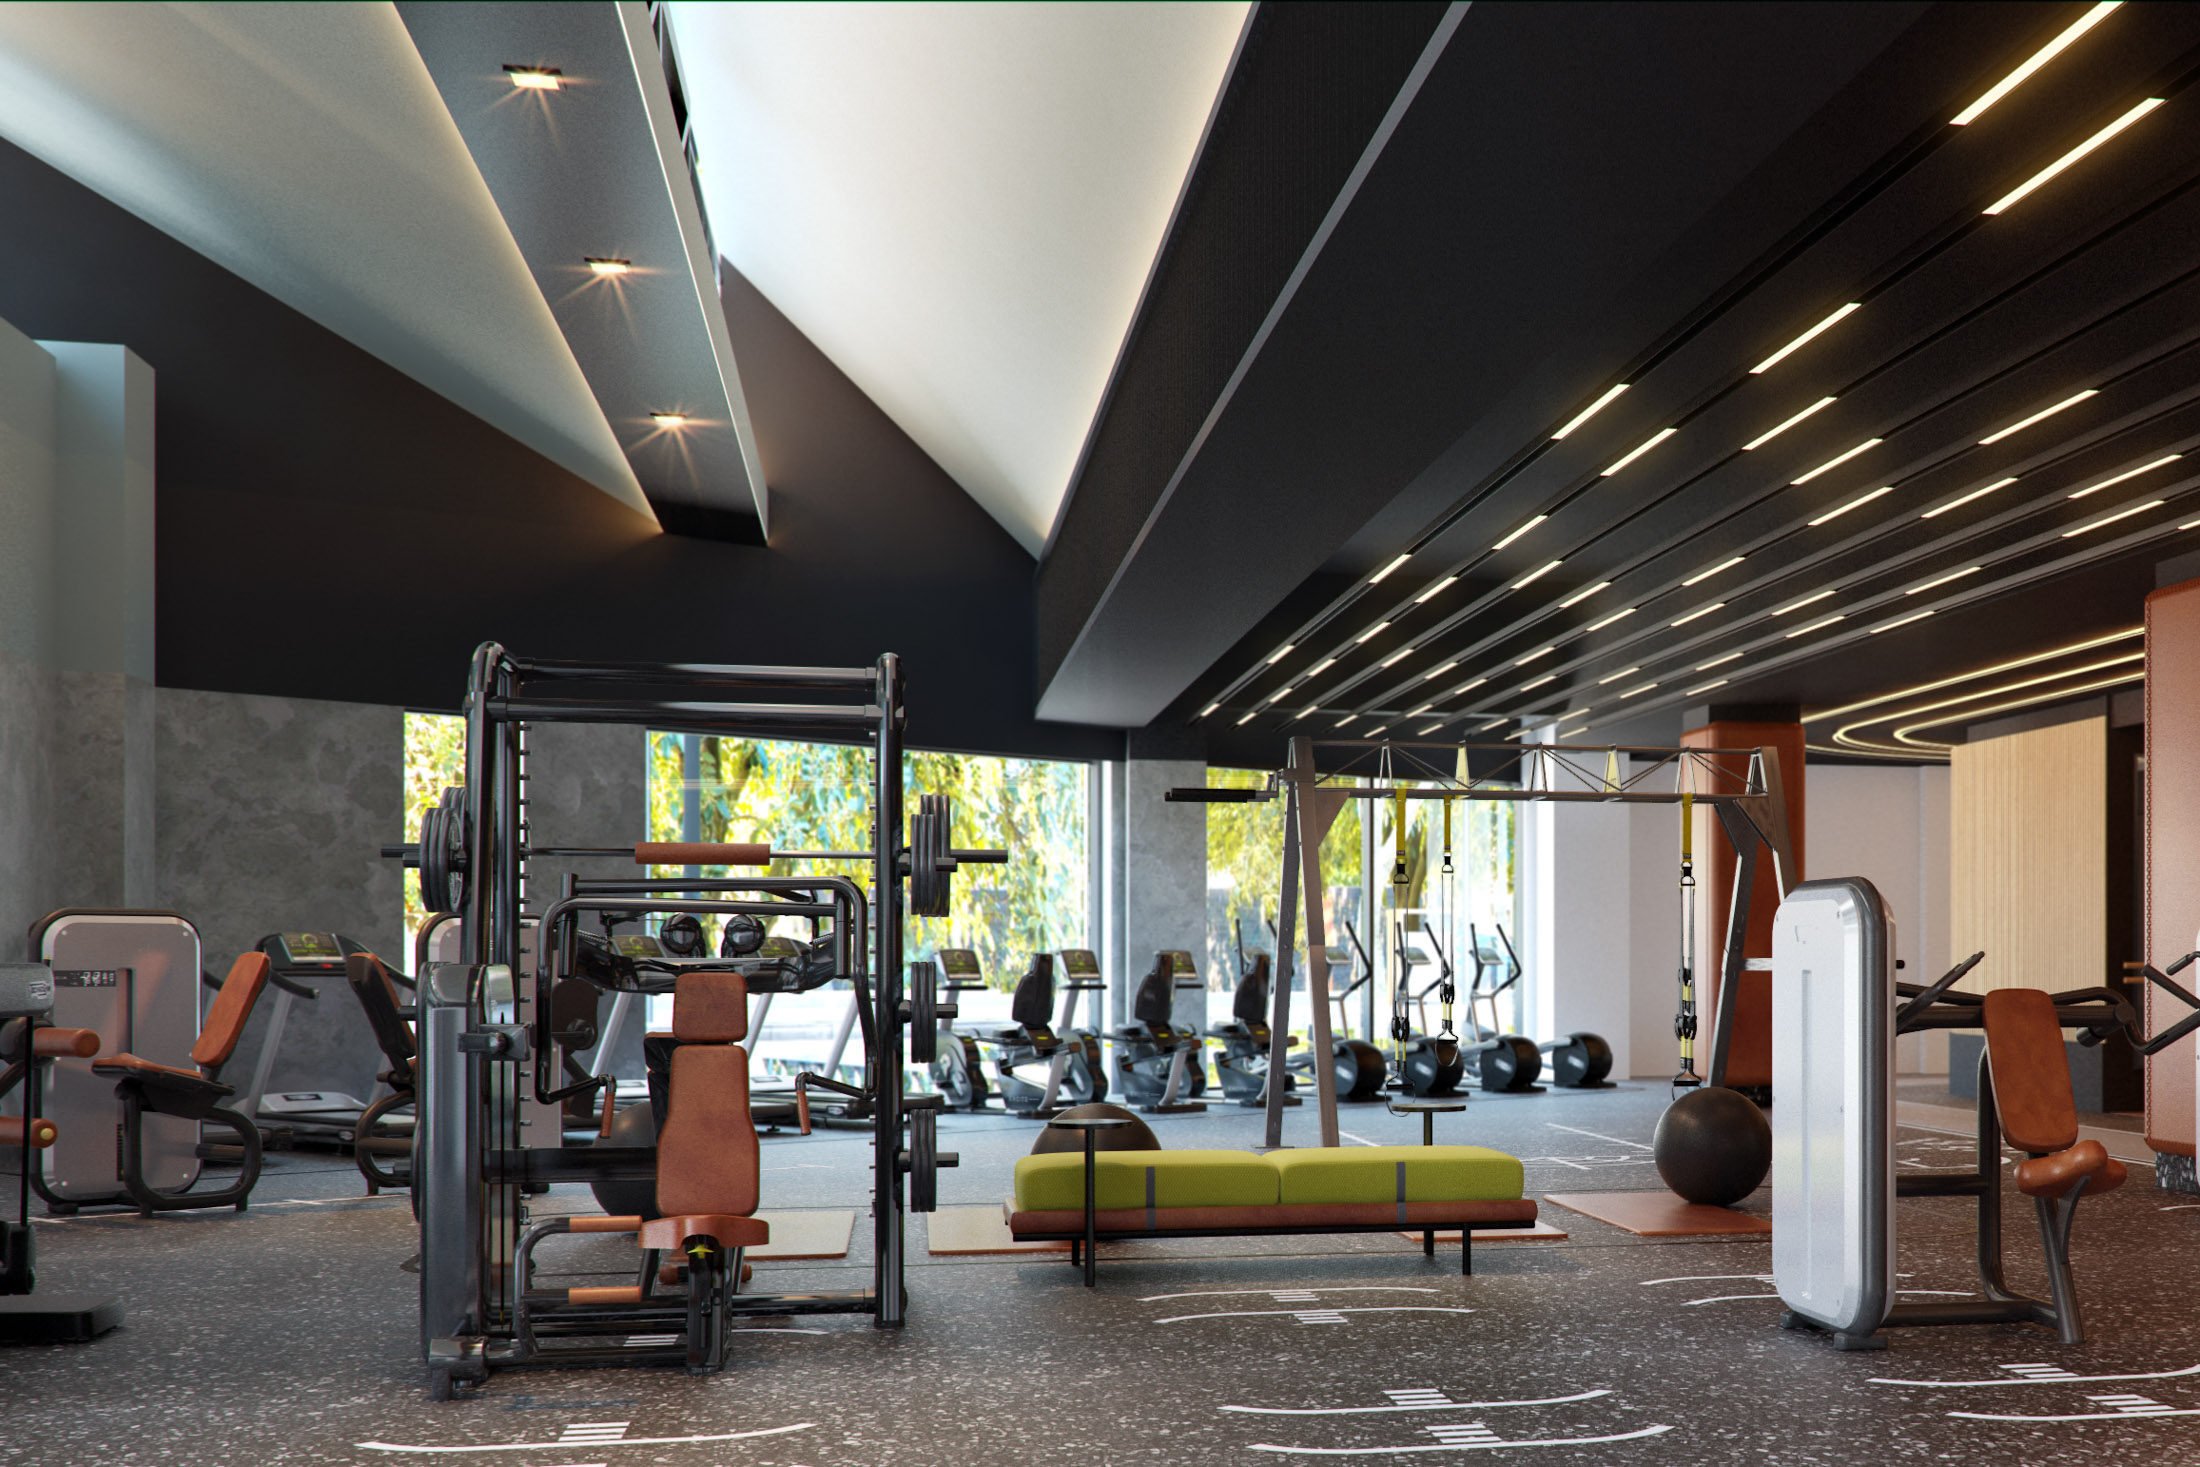 Luxury sport and fitness hotels where the gym takes centre stage offer new  angle on wellness tourism | South China Morning Post